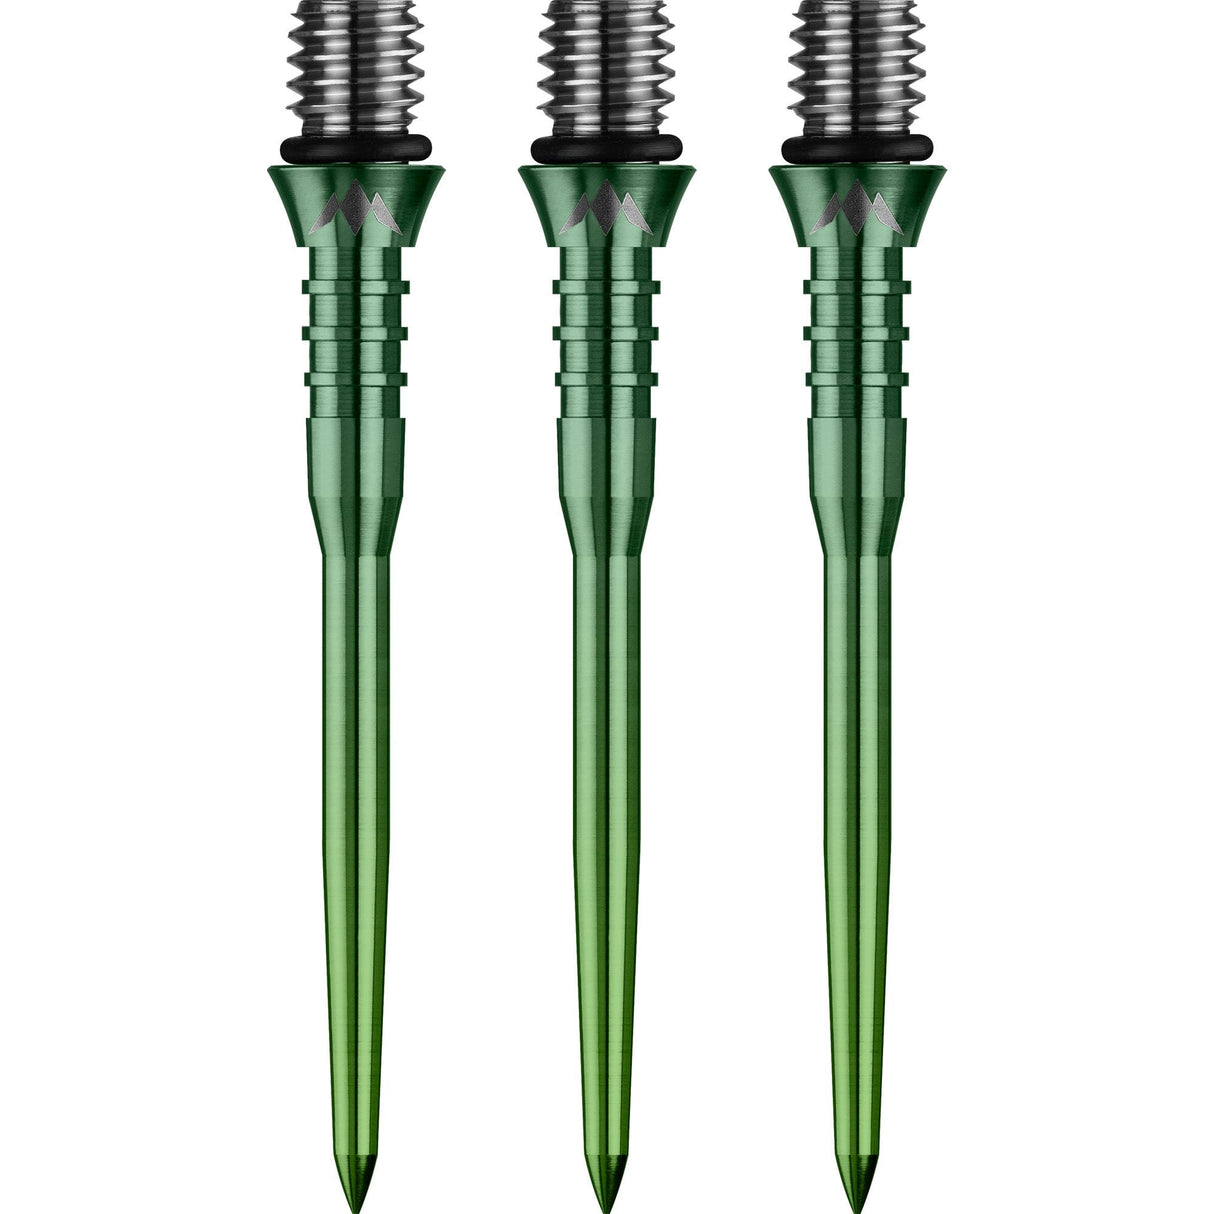 Mission Titan Pro Ti Conversion Points - Grooved - Gradient Green 34mm